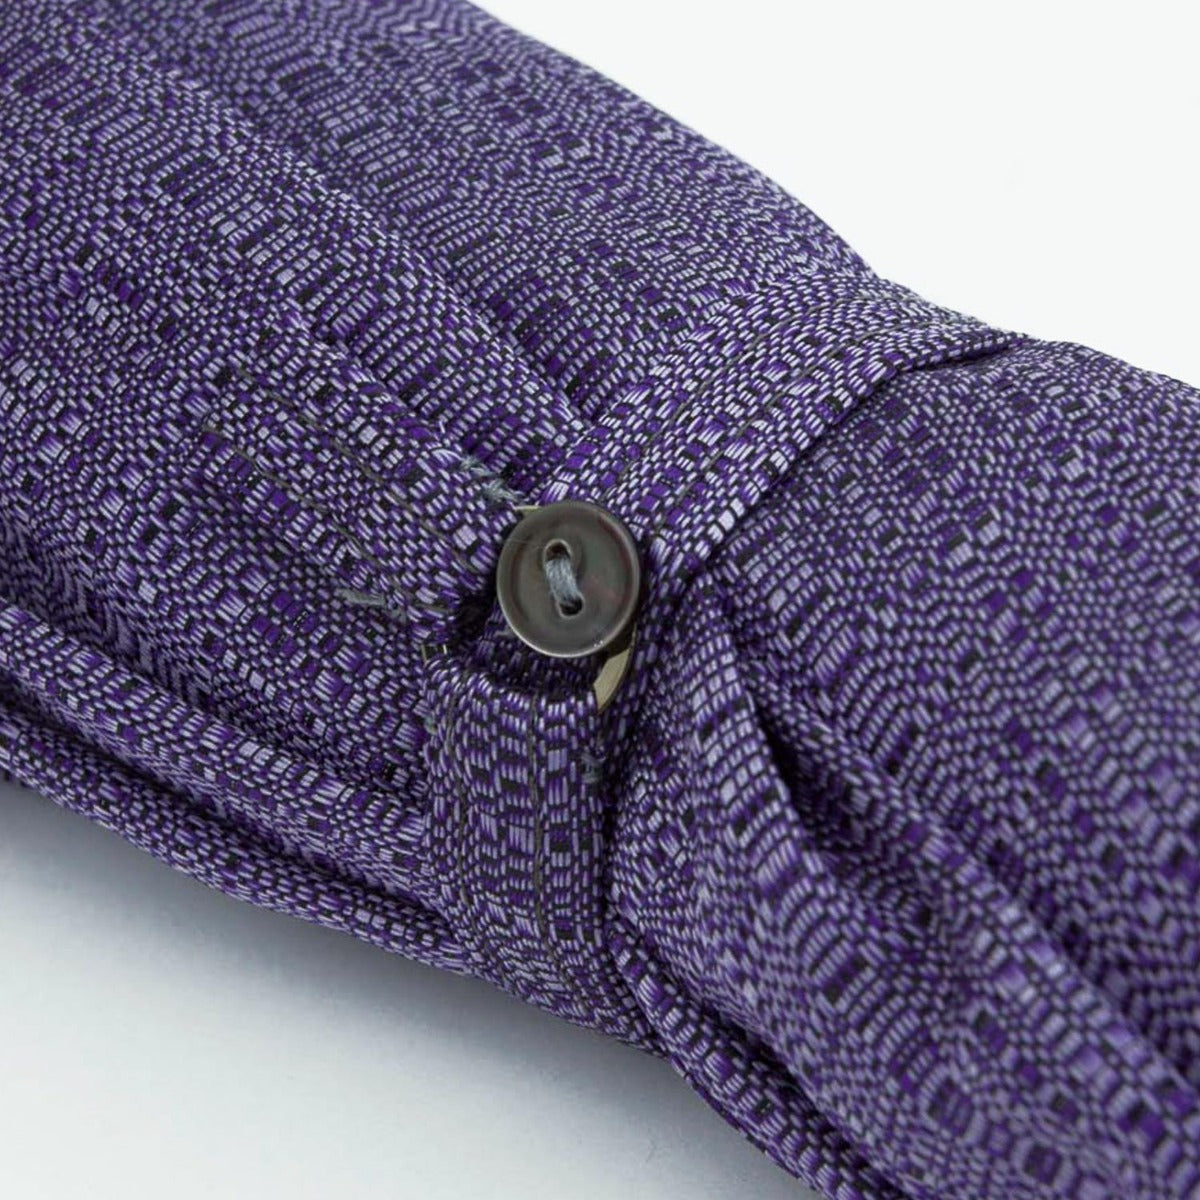 A close up of a KirbyAllison.com Imperial Purple Travel Umbrella with Maple Handle and an Italian umbrella.